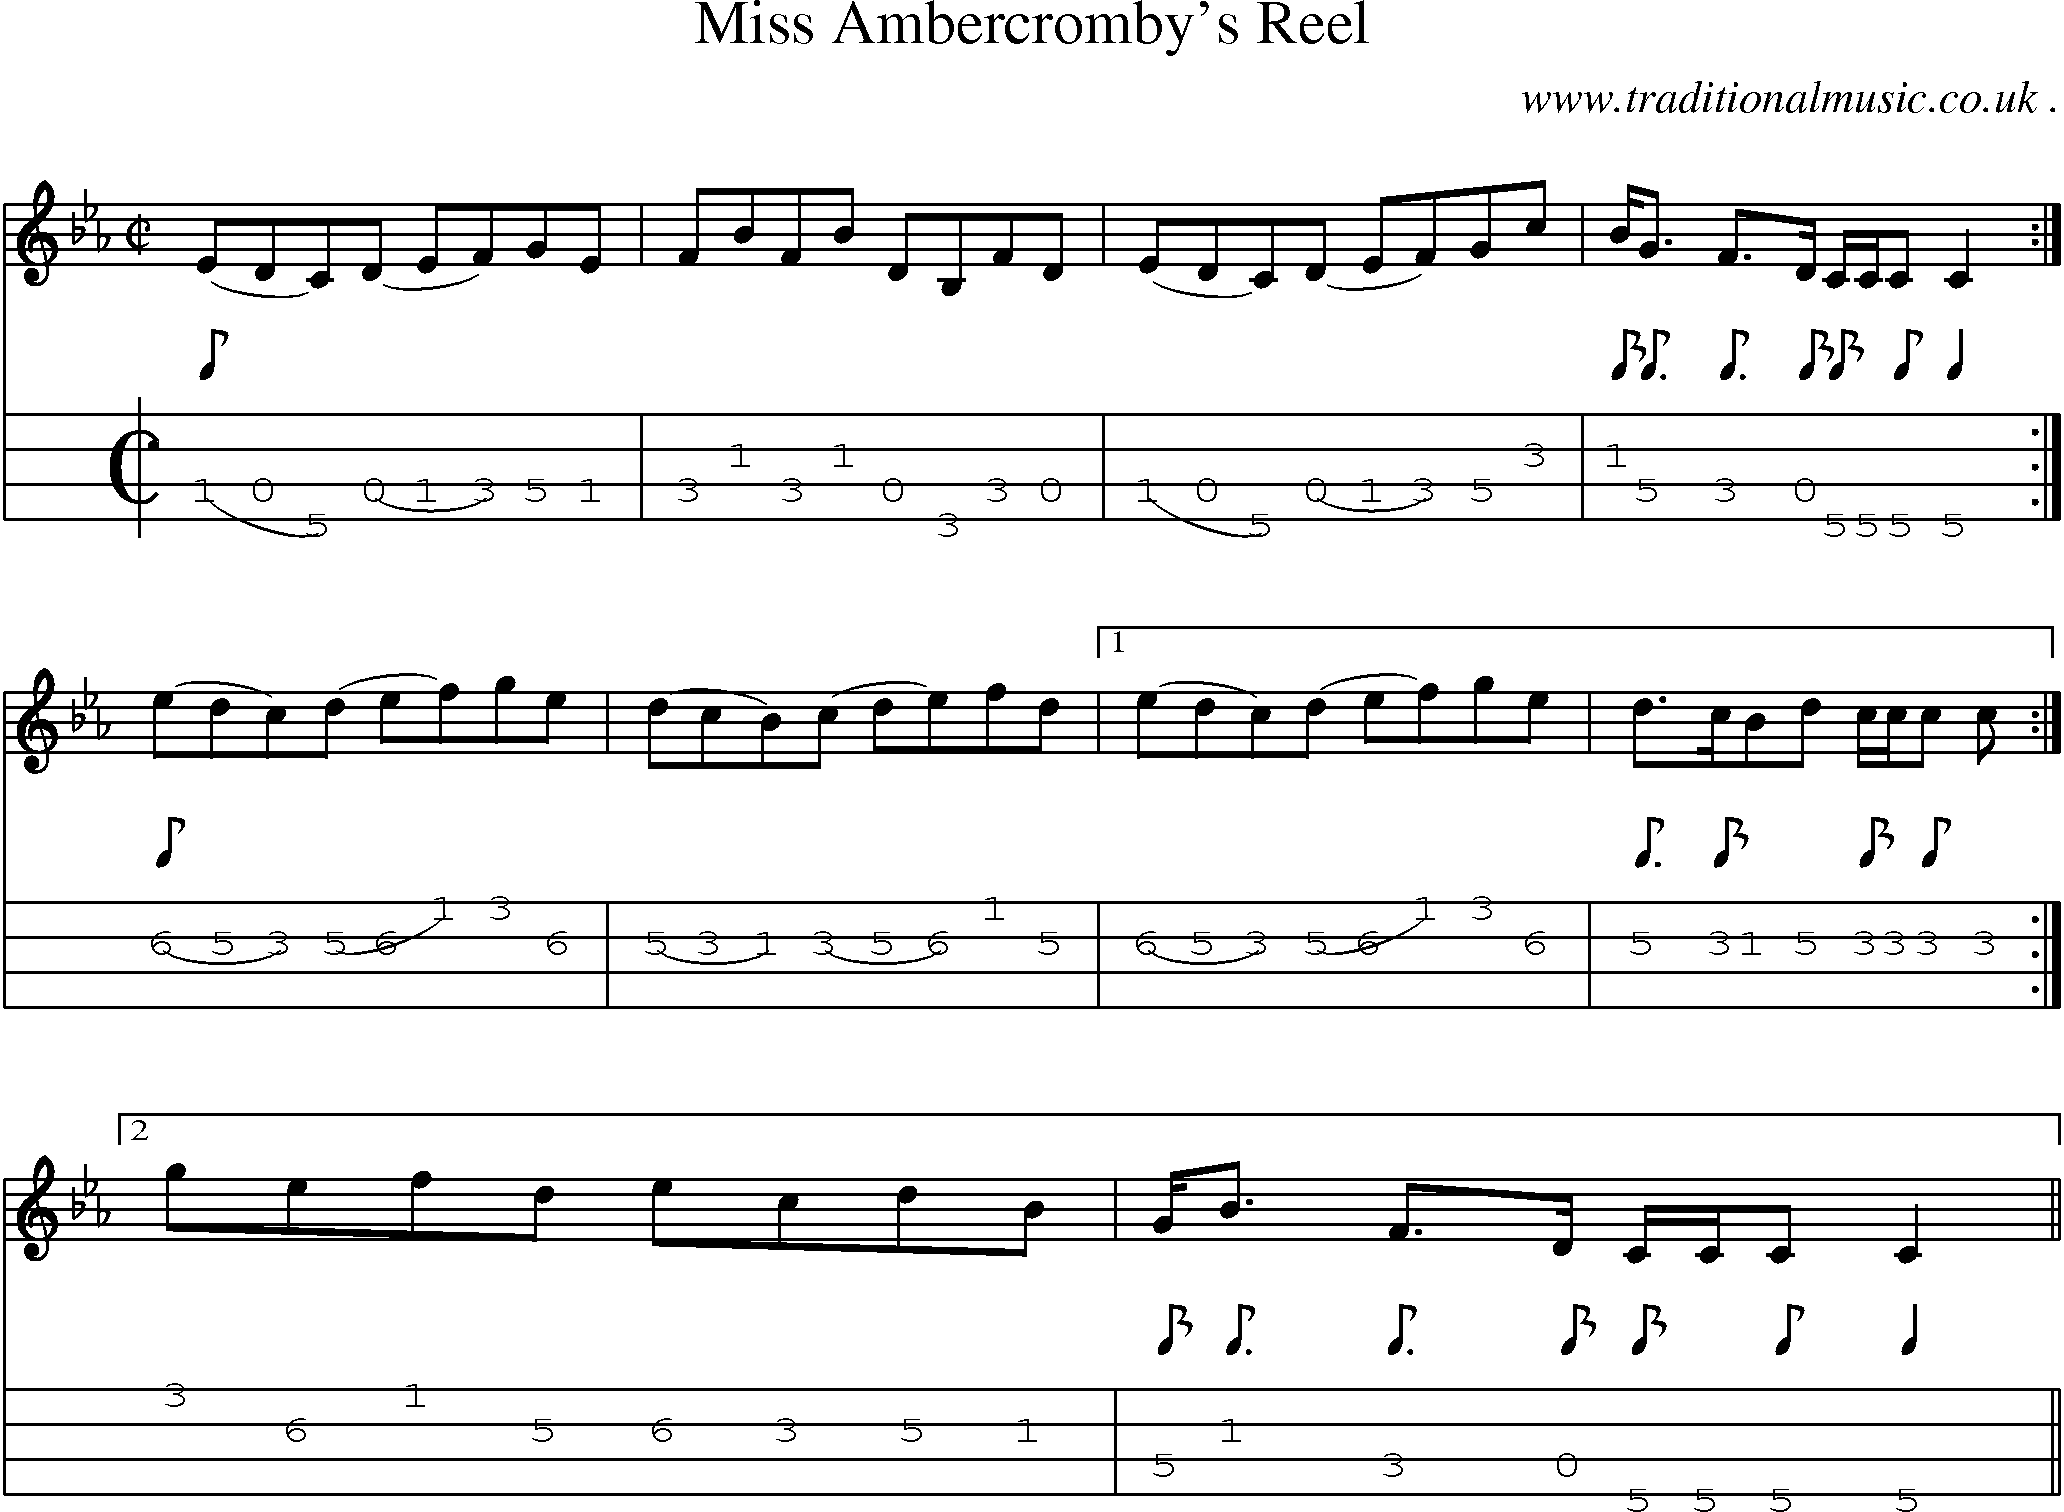 Sheet-music  score, Chords and Mandolin Tabs for Miss Ambercrombys Reel